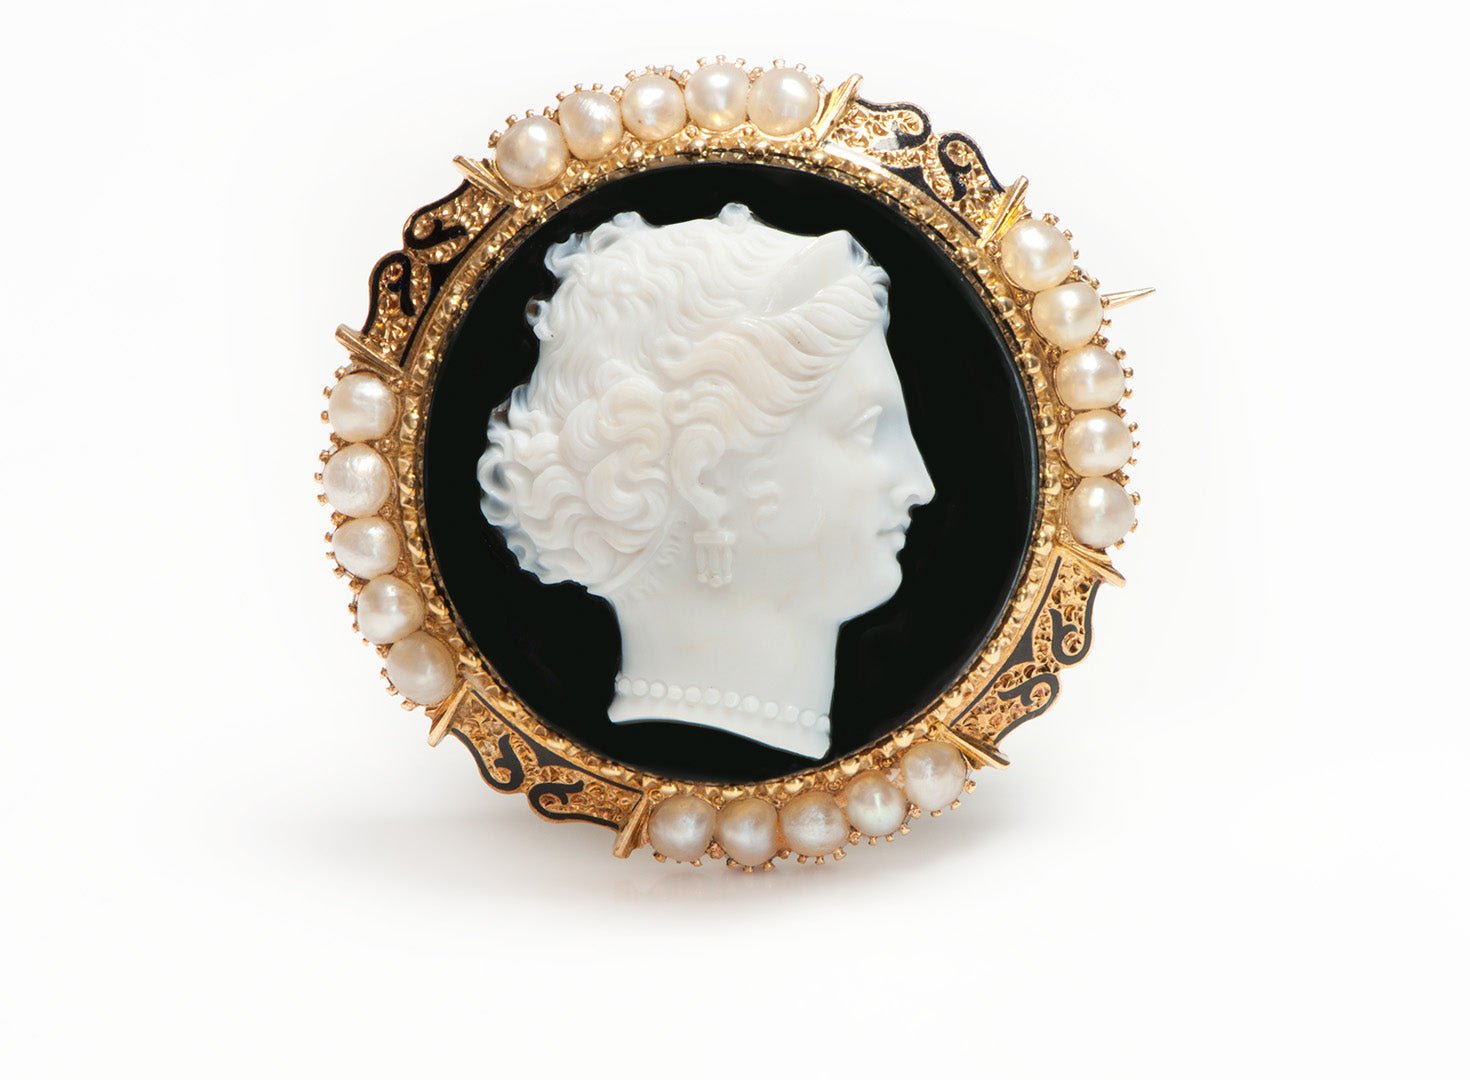 Antique Gold Cameo Pearl and Enamel Brooch